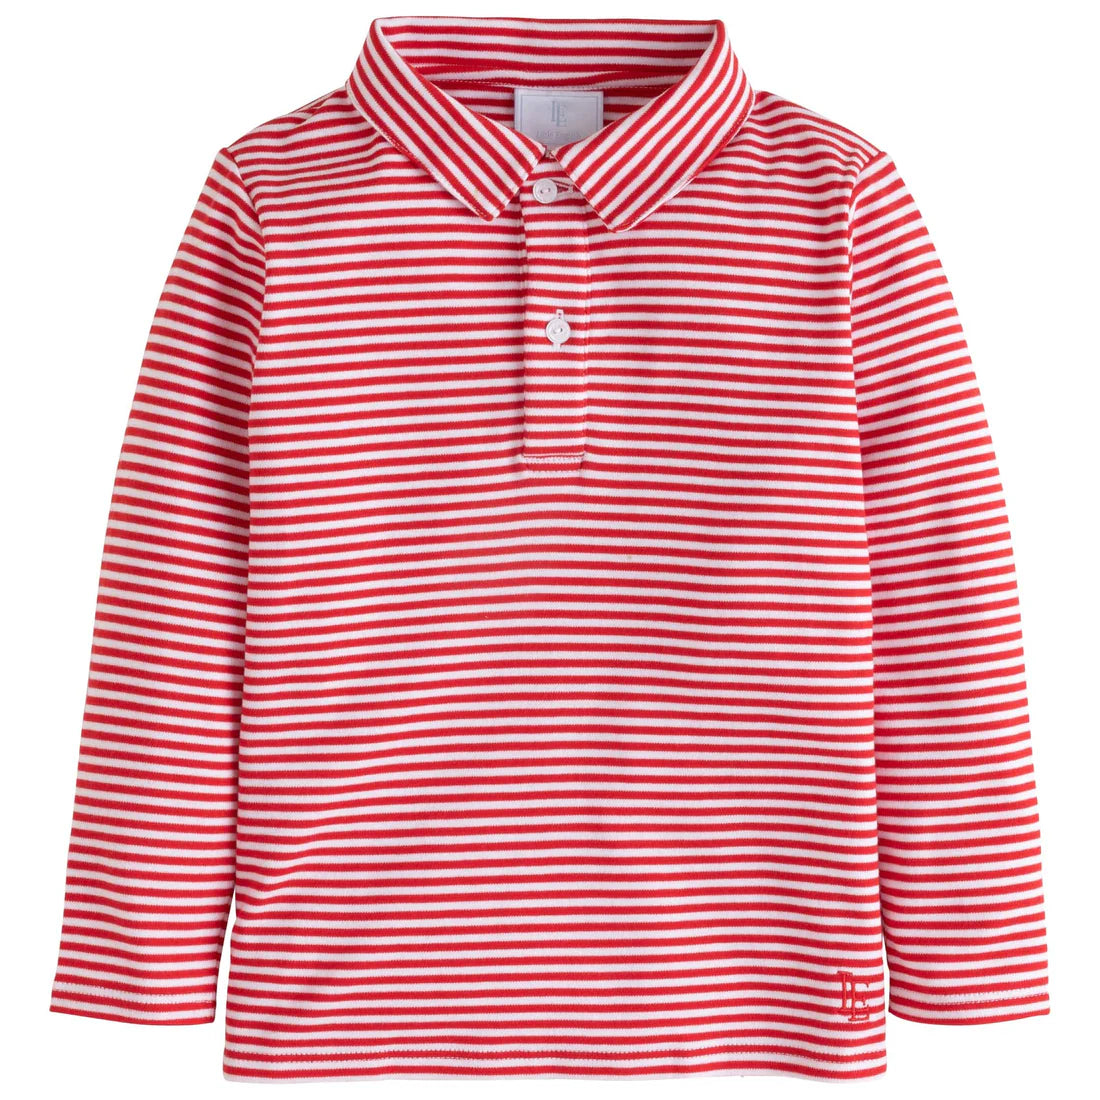 Long Sleeve Red Striped Polo